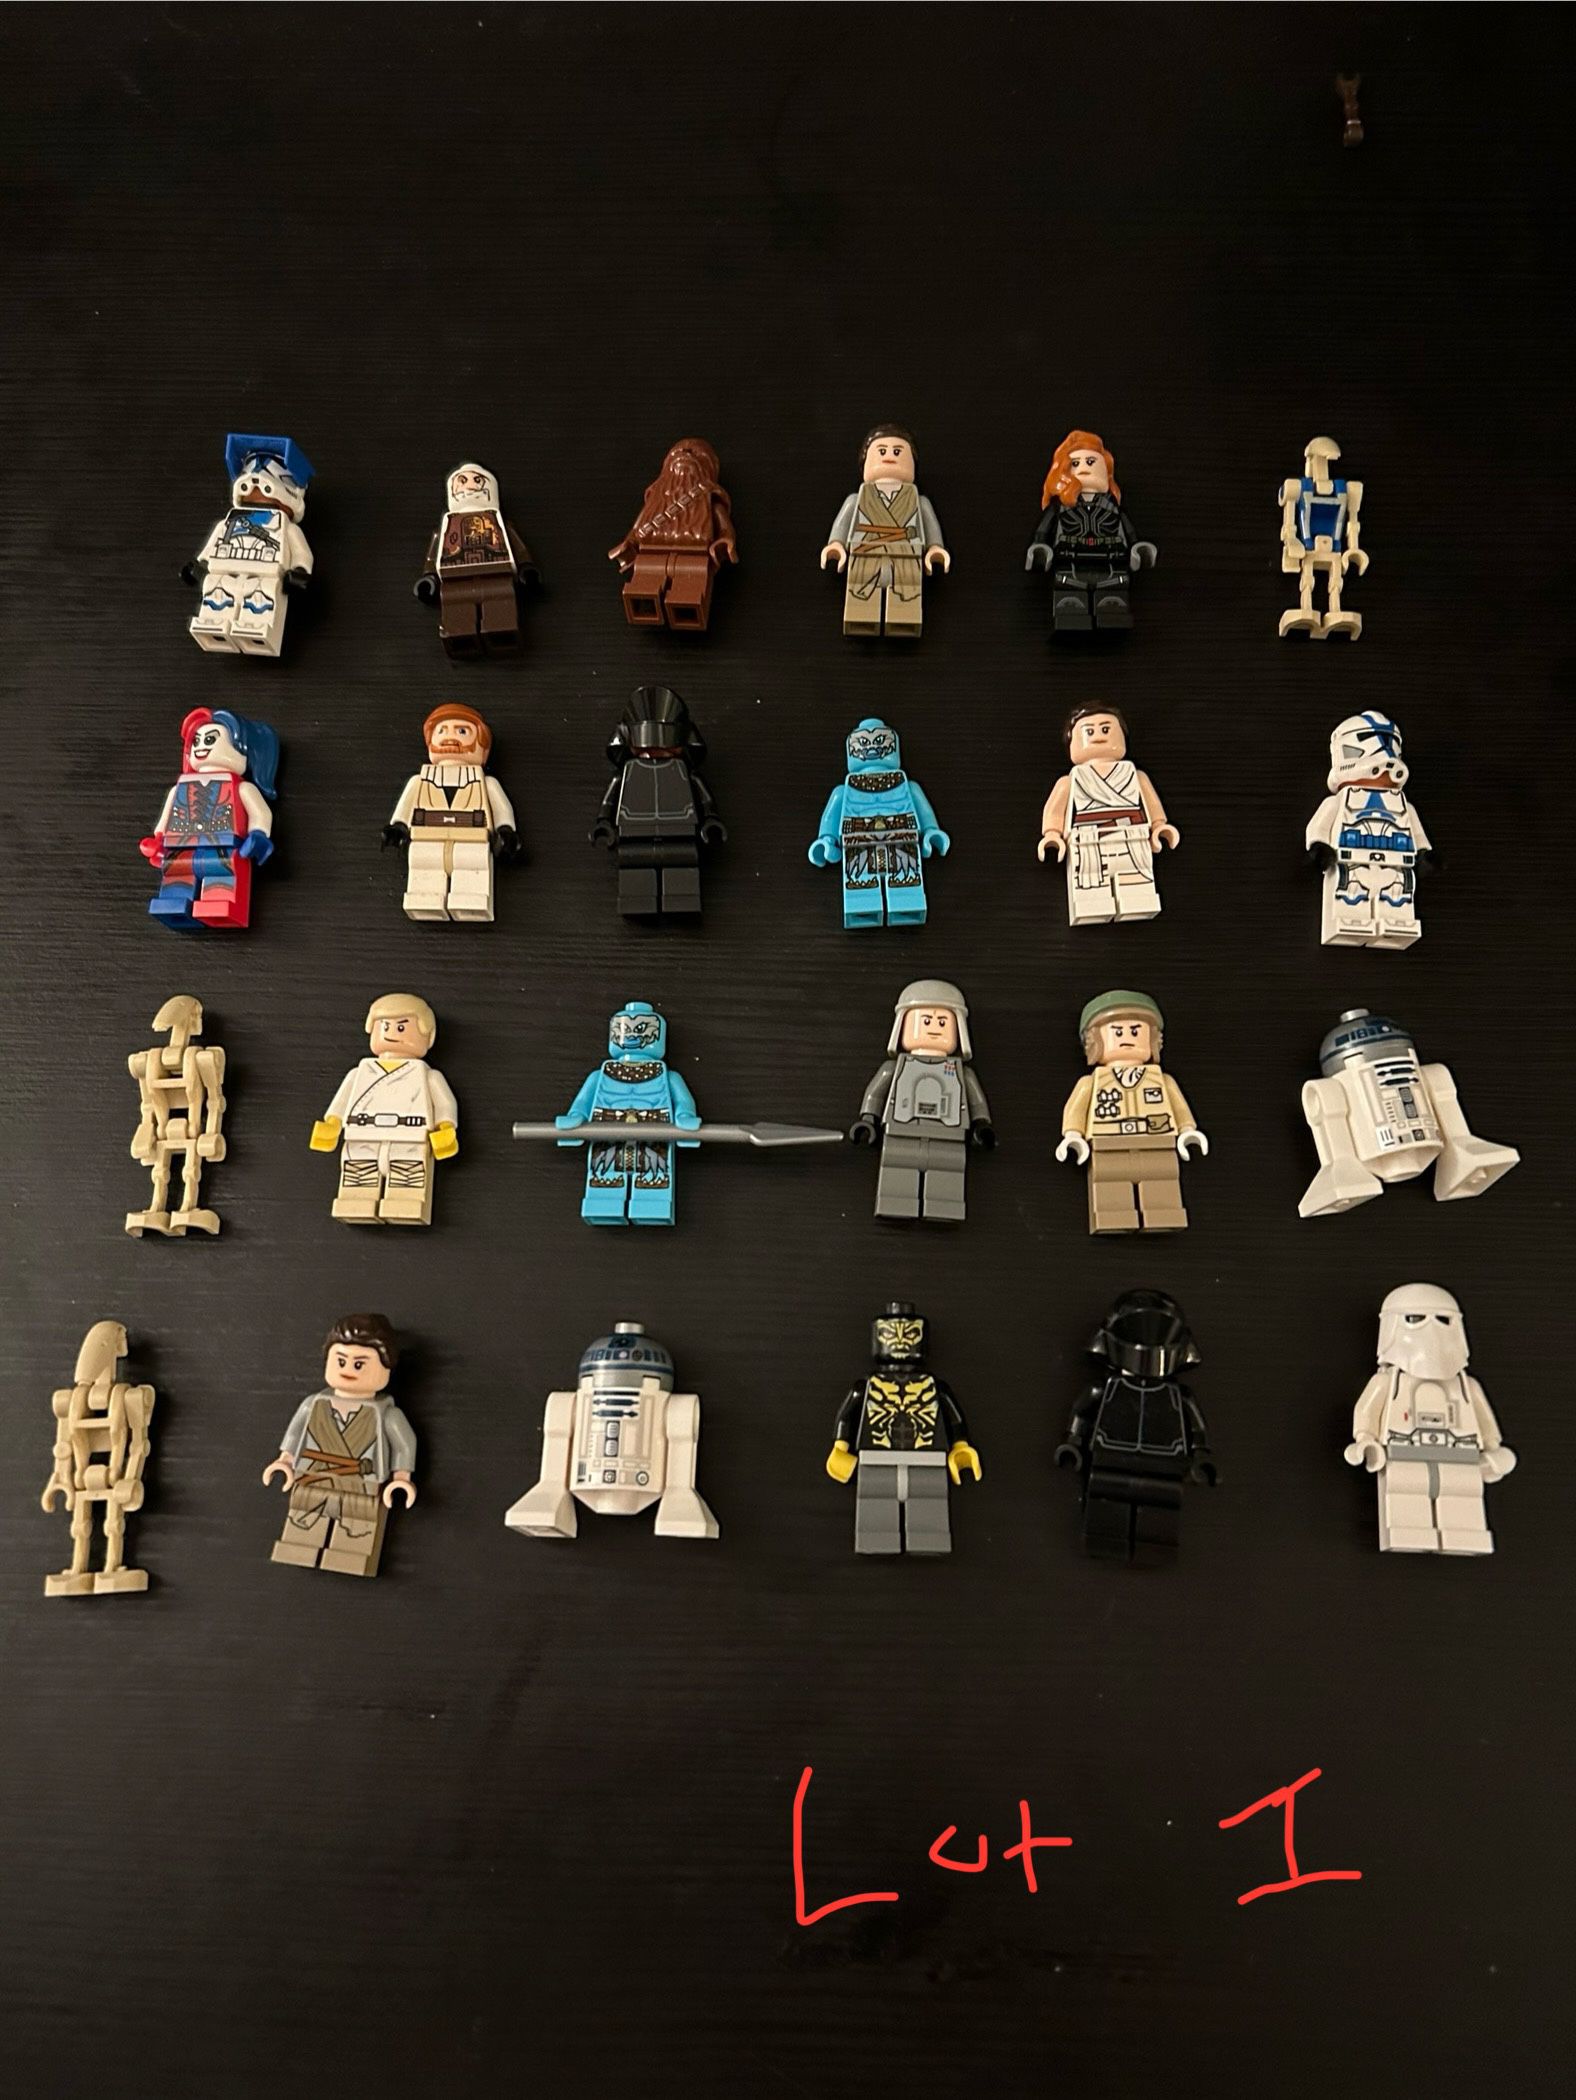 LOTS OF 20 LEGO BRAND MINIFIGURES (STAR WARS, SUPER HEROES, HARRY POTTER, MORE)